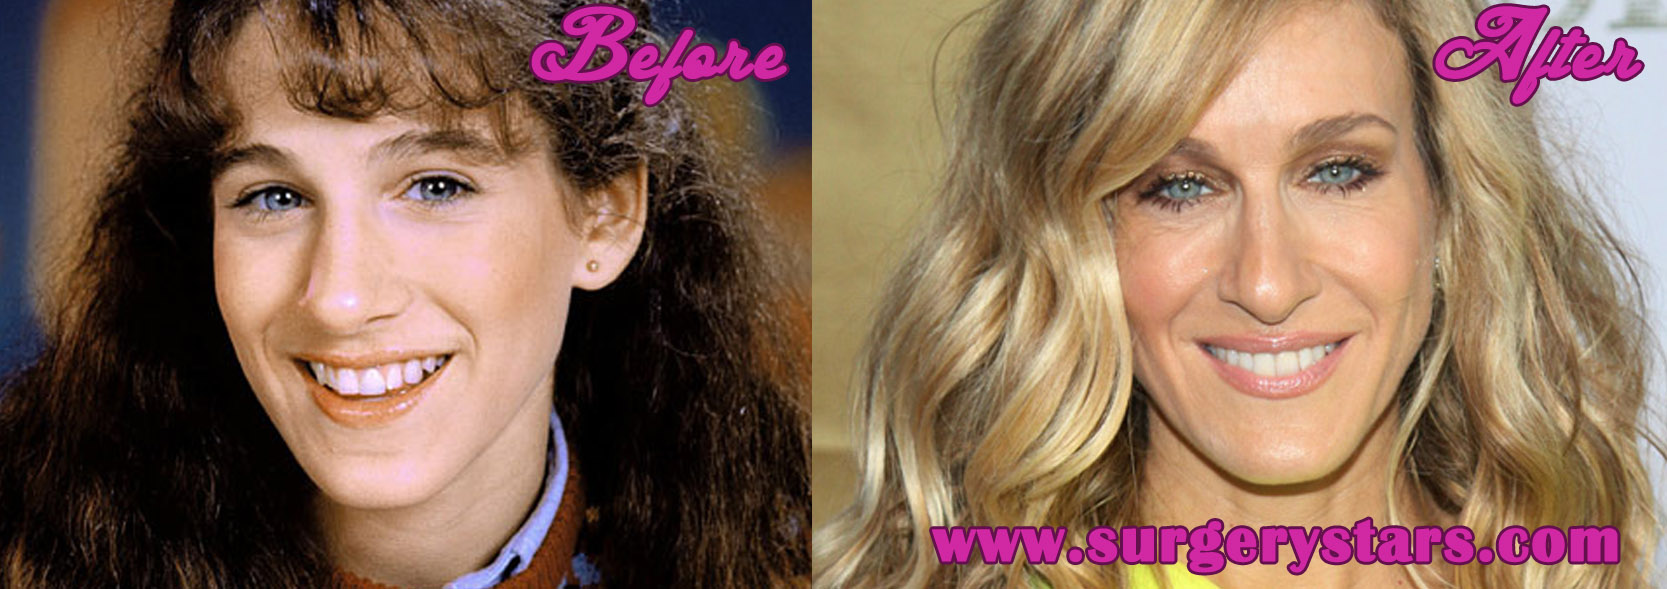 Sarah Jessica Parker Plastic Surgery - Before and After Pictures.